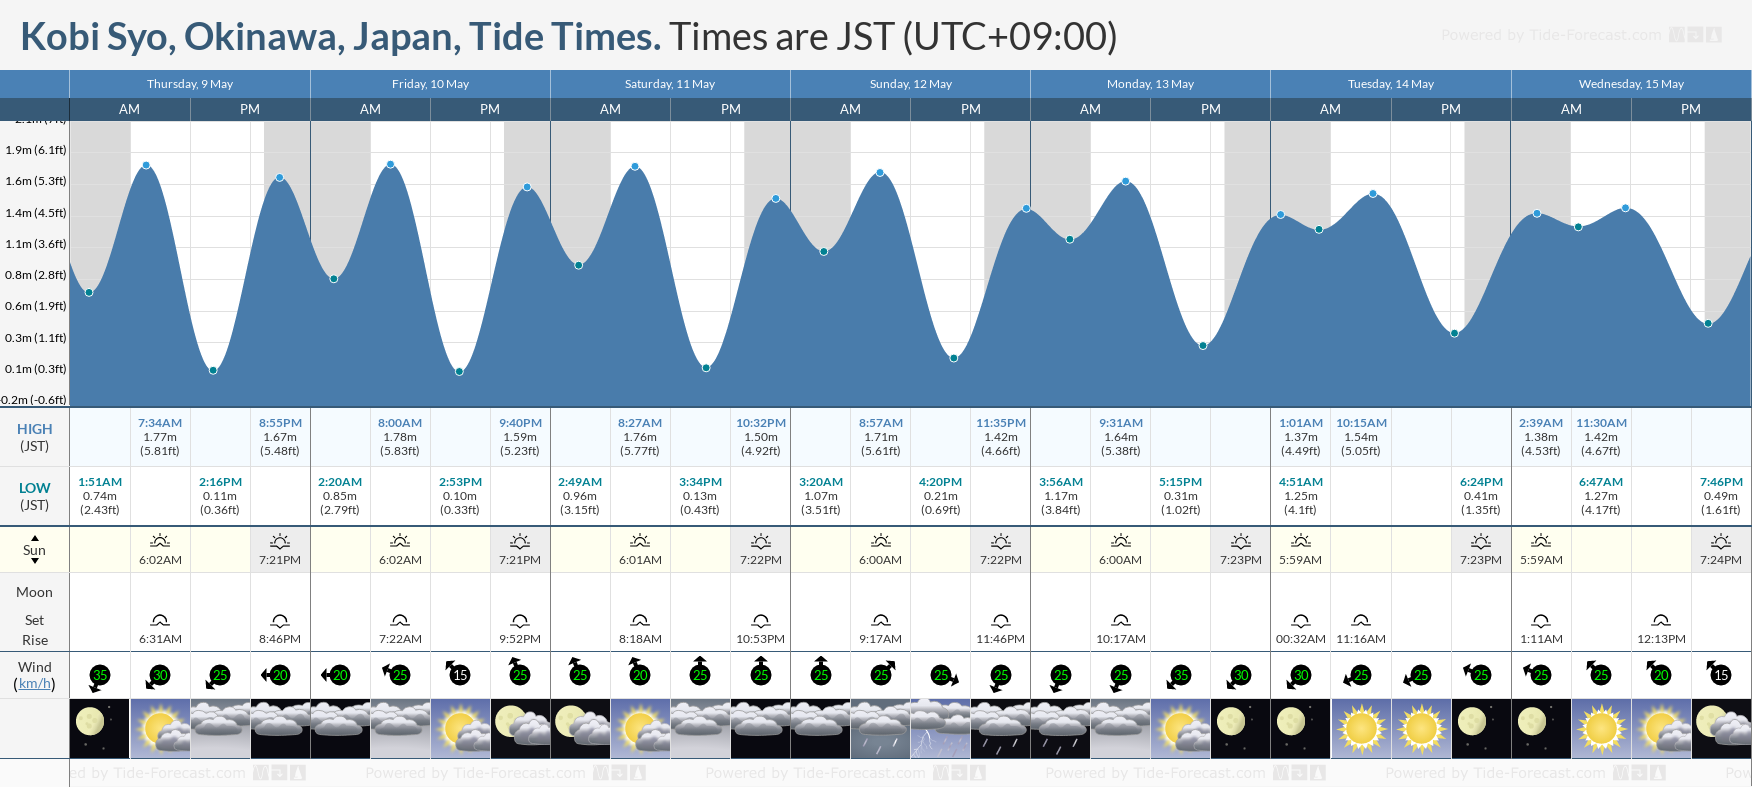 Kobi Syo, Okinawa, Japan Tide Chart including high and low tide times for the next 7 days